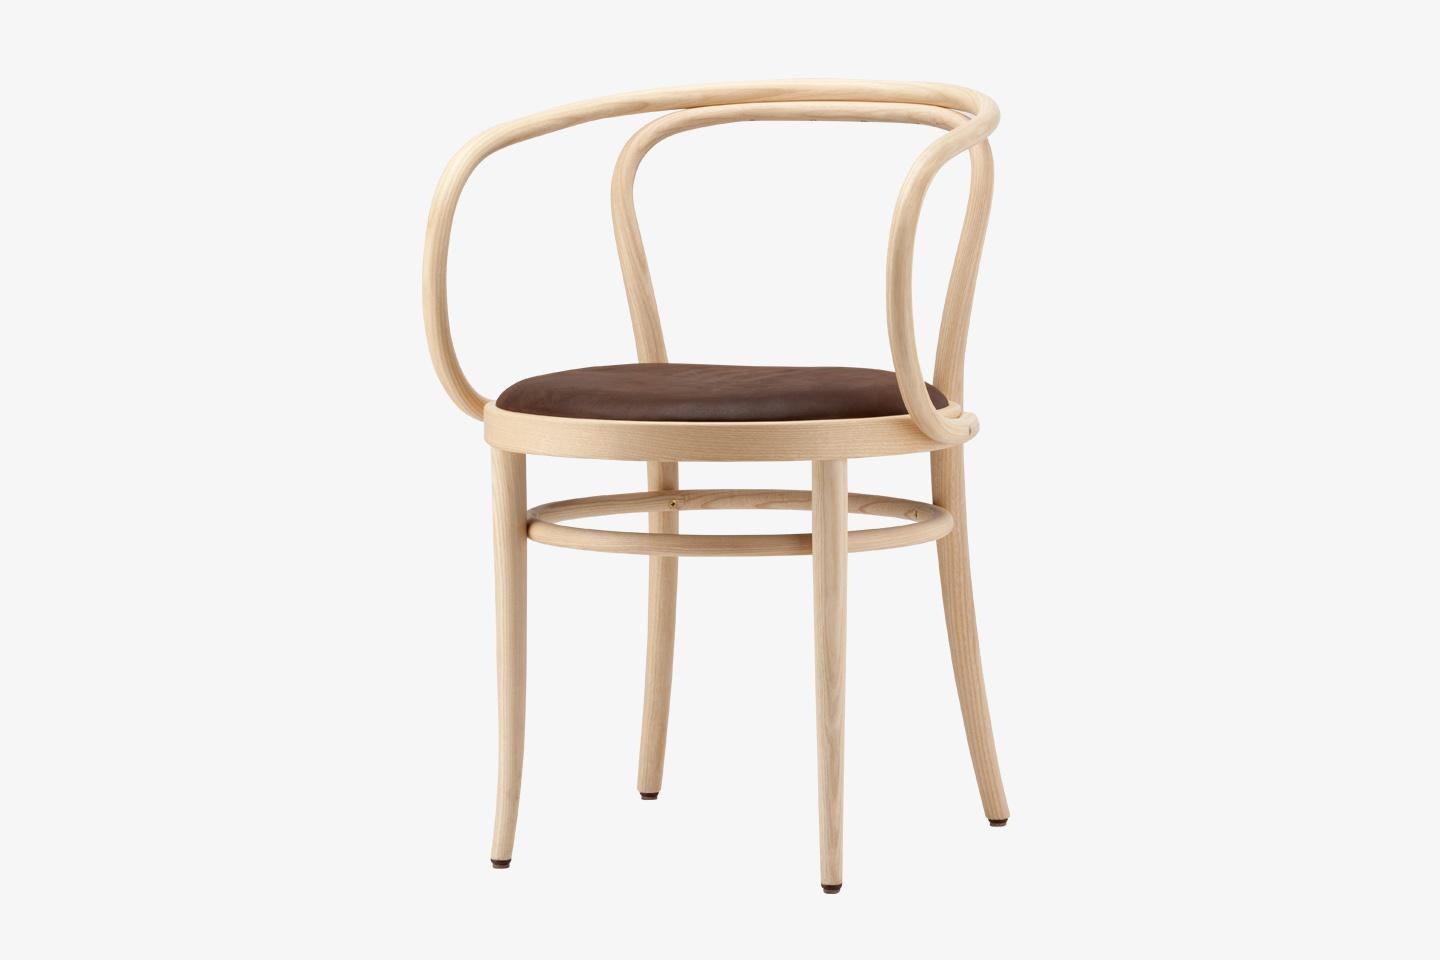 Customizable 209 Bentwood Chair by Gebrüder T, 1819 For Sale 2